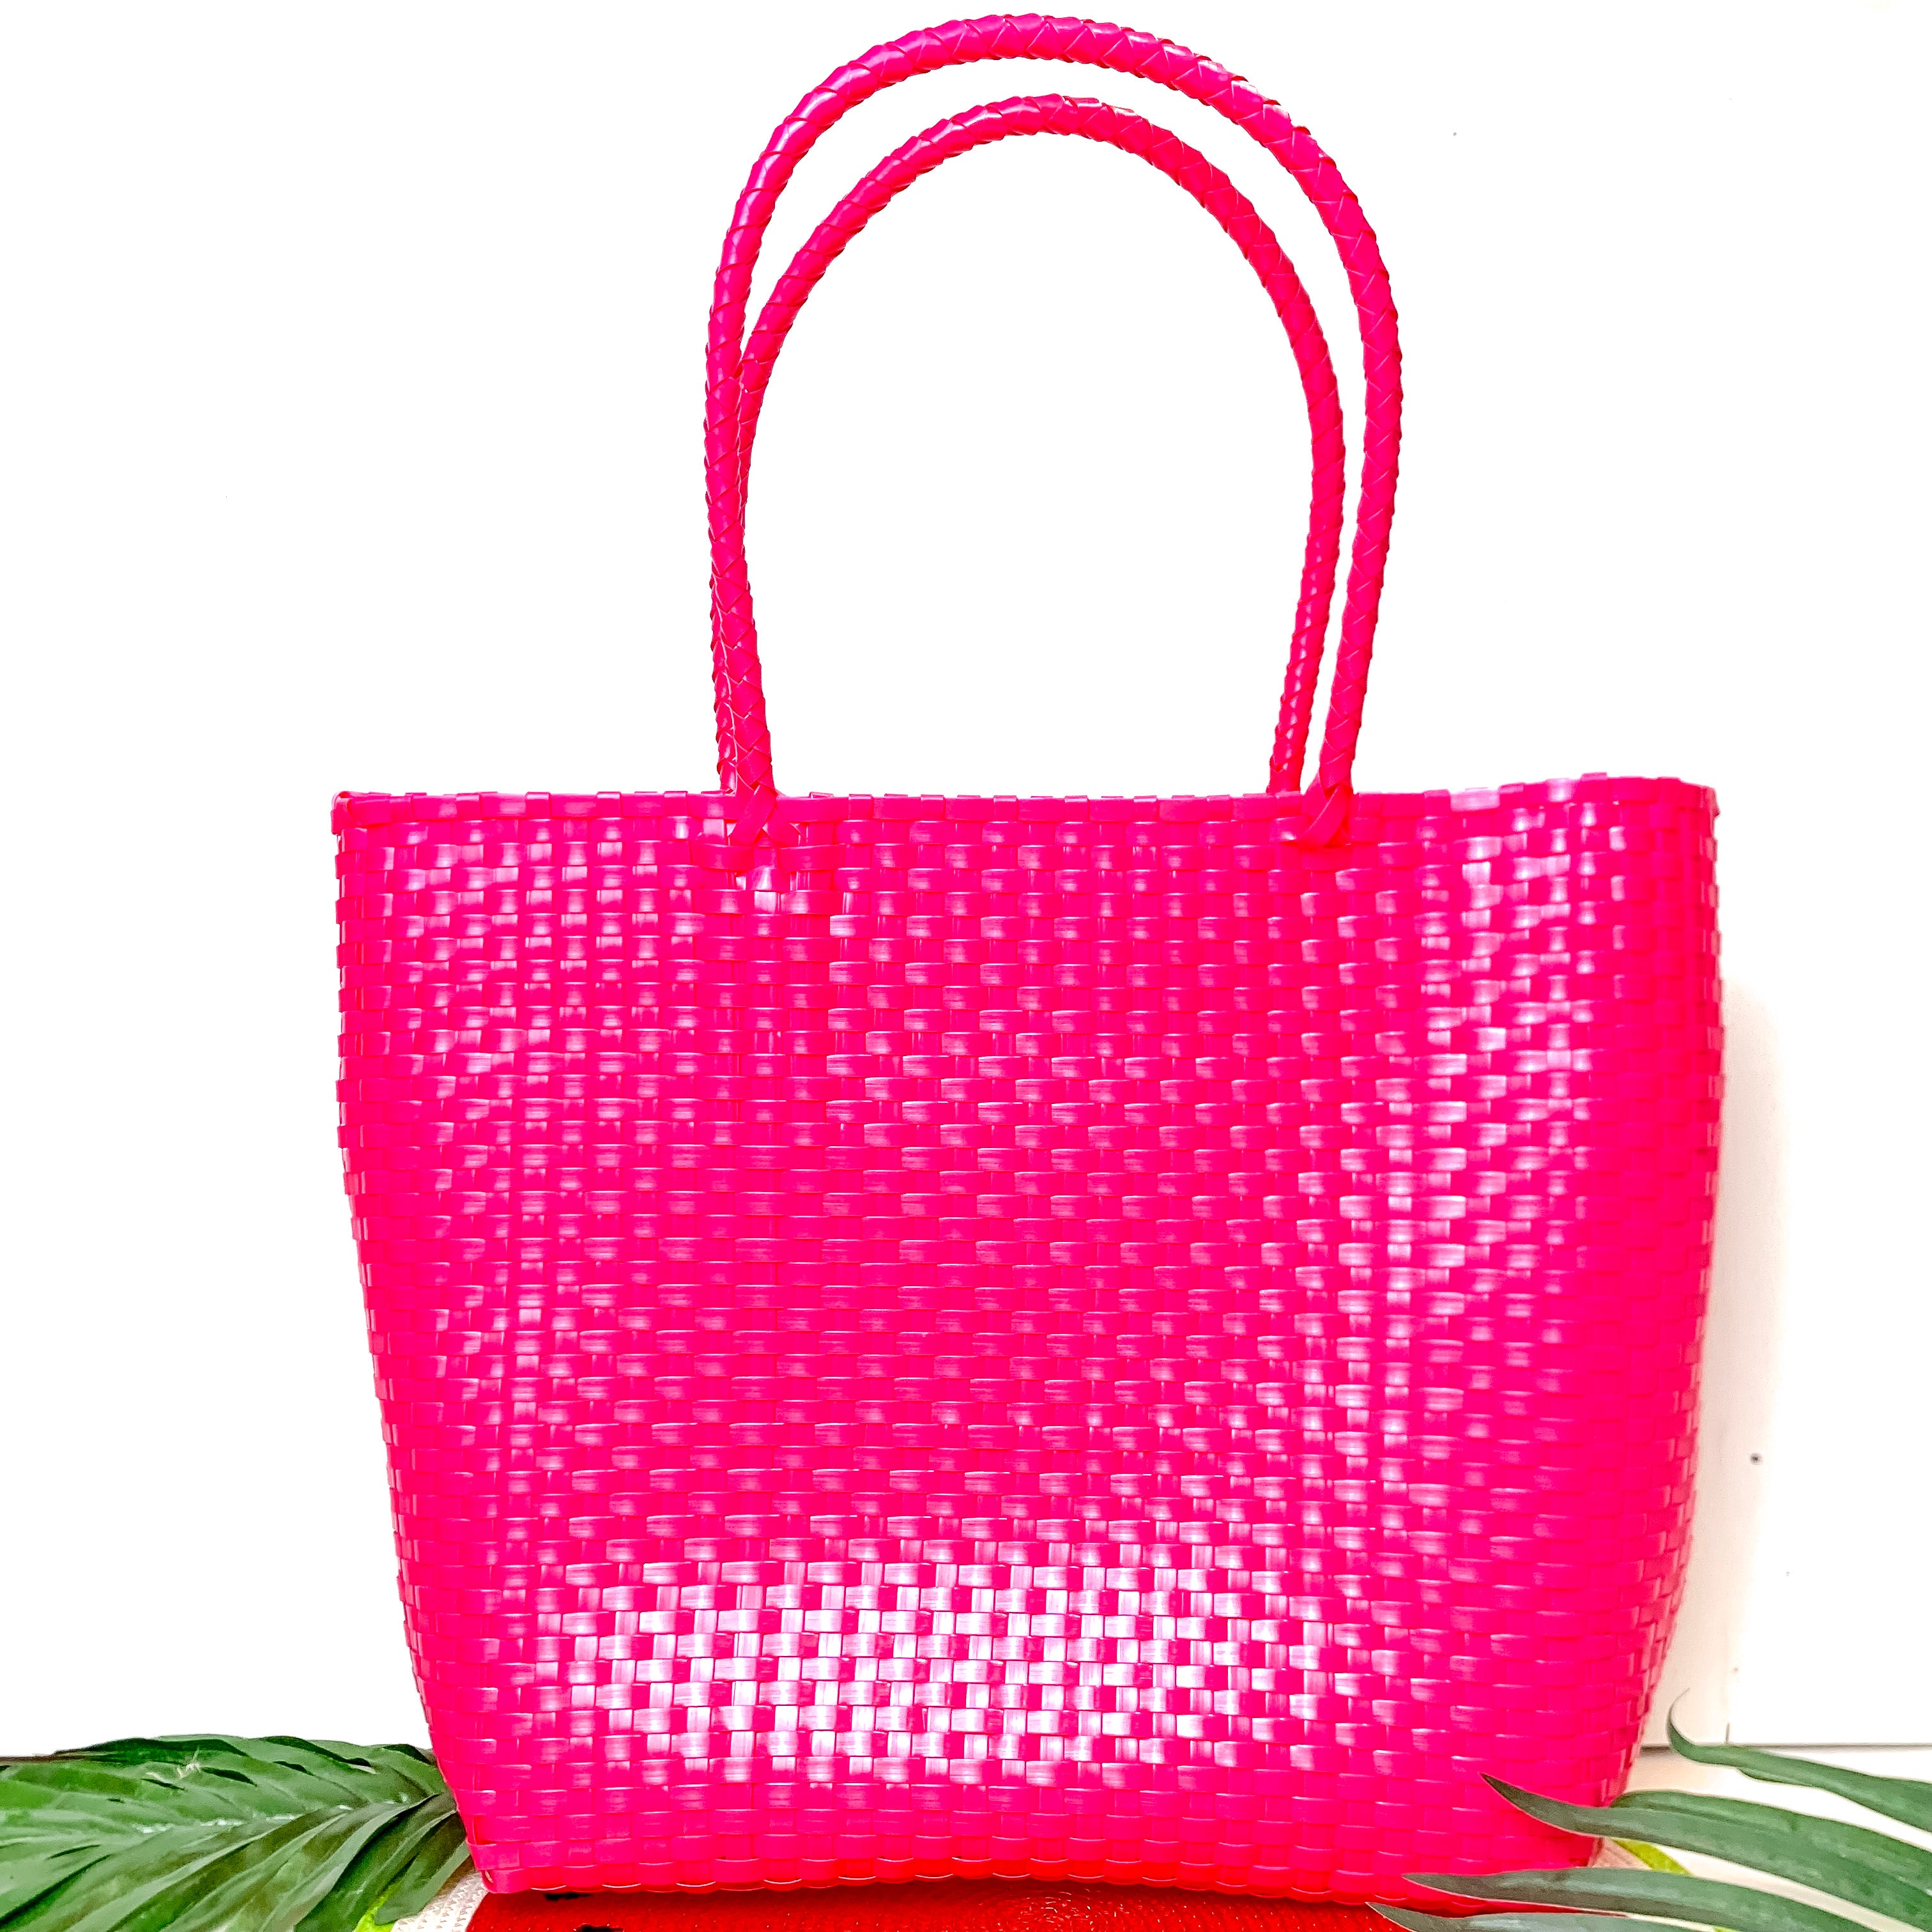 Coastal Couture Carryall Tote Bag in Neon Pink - Giddy Up Glamour Boutique